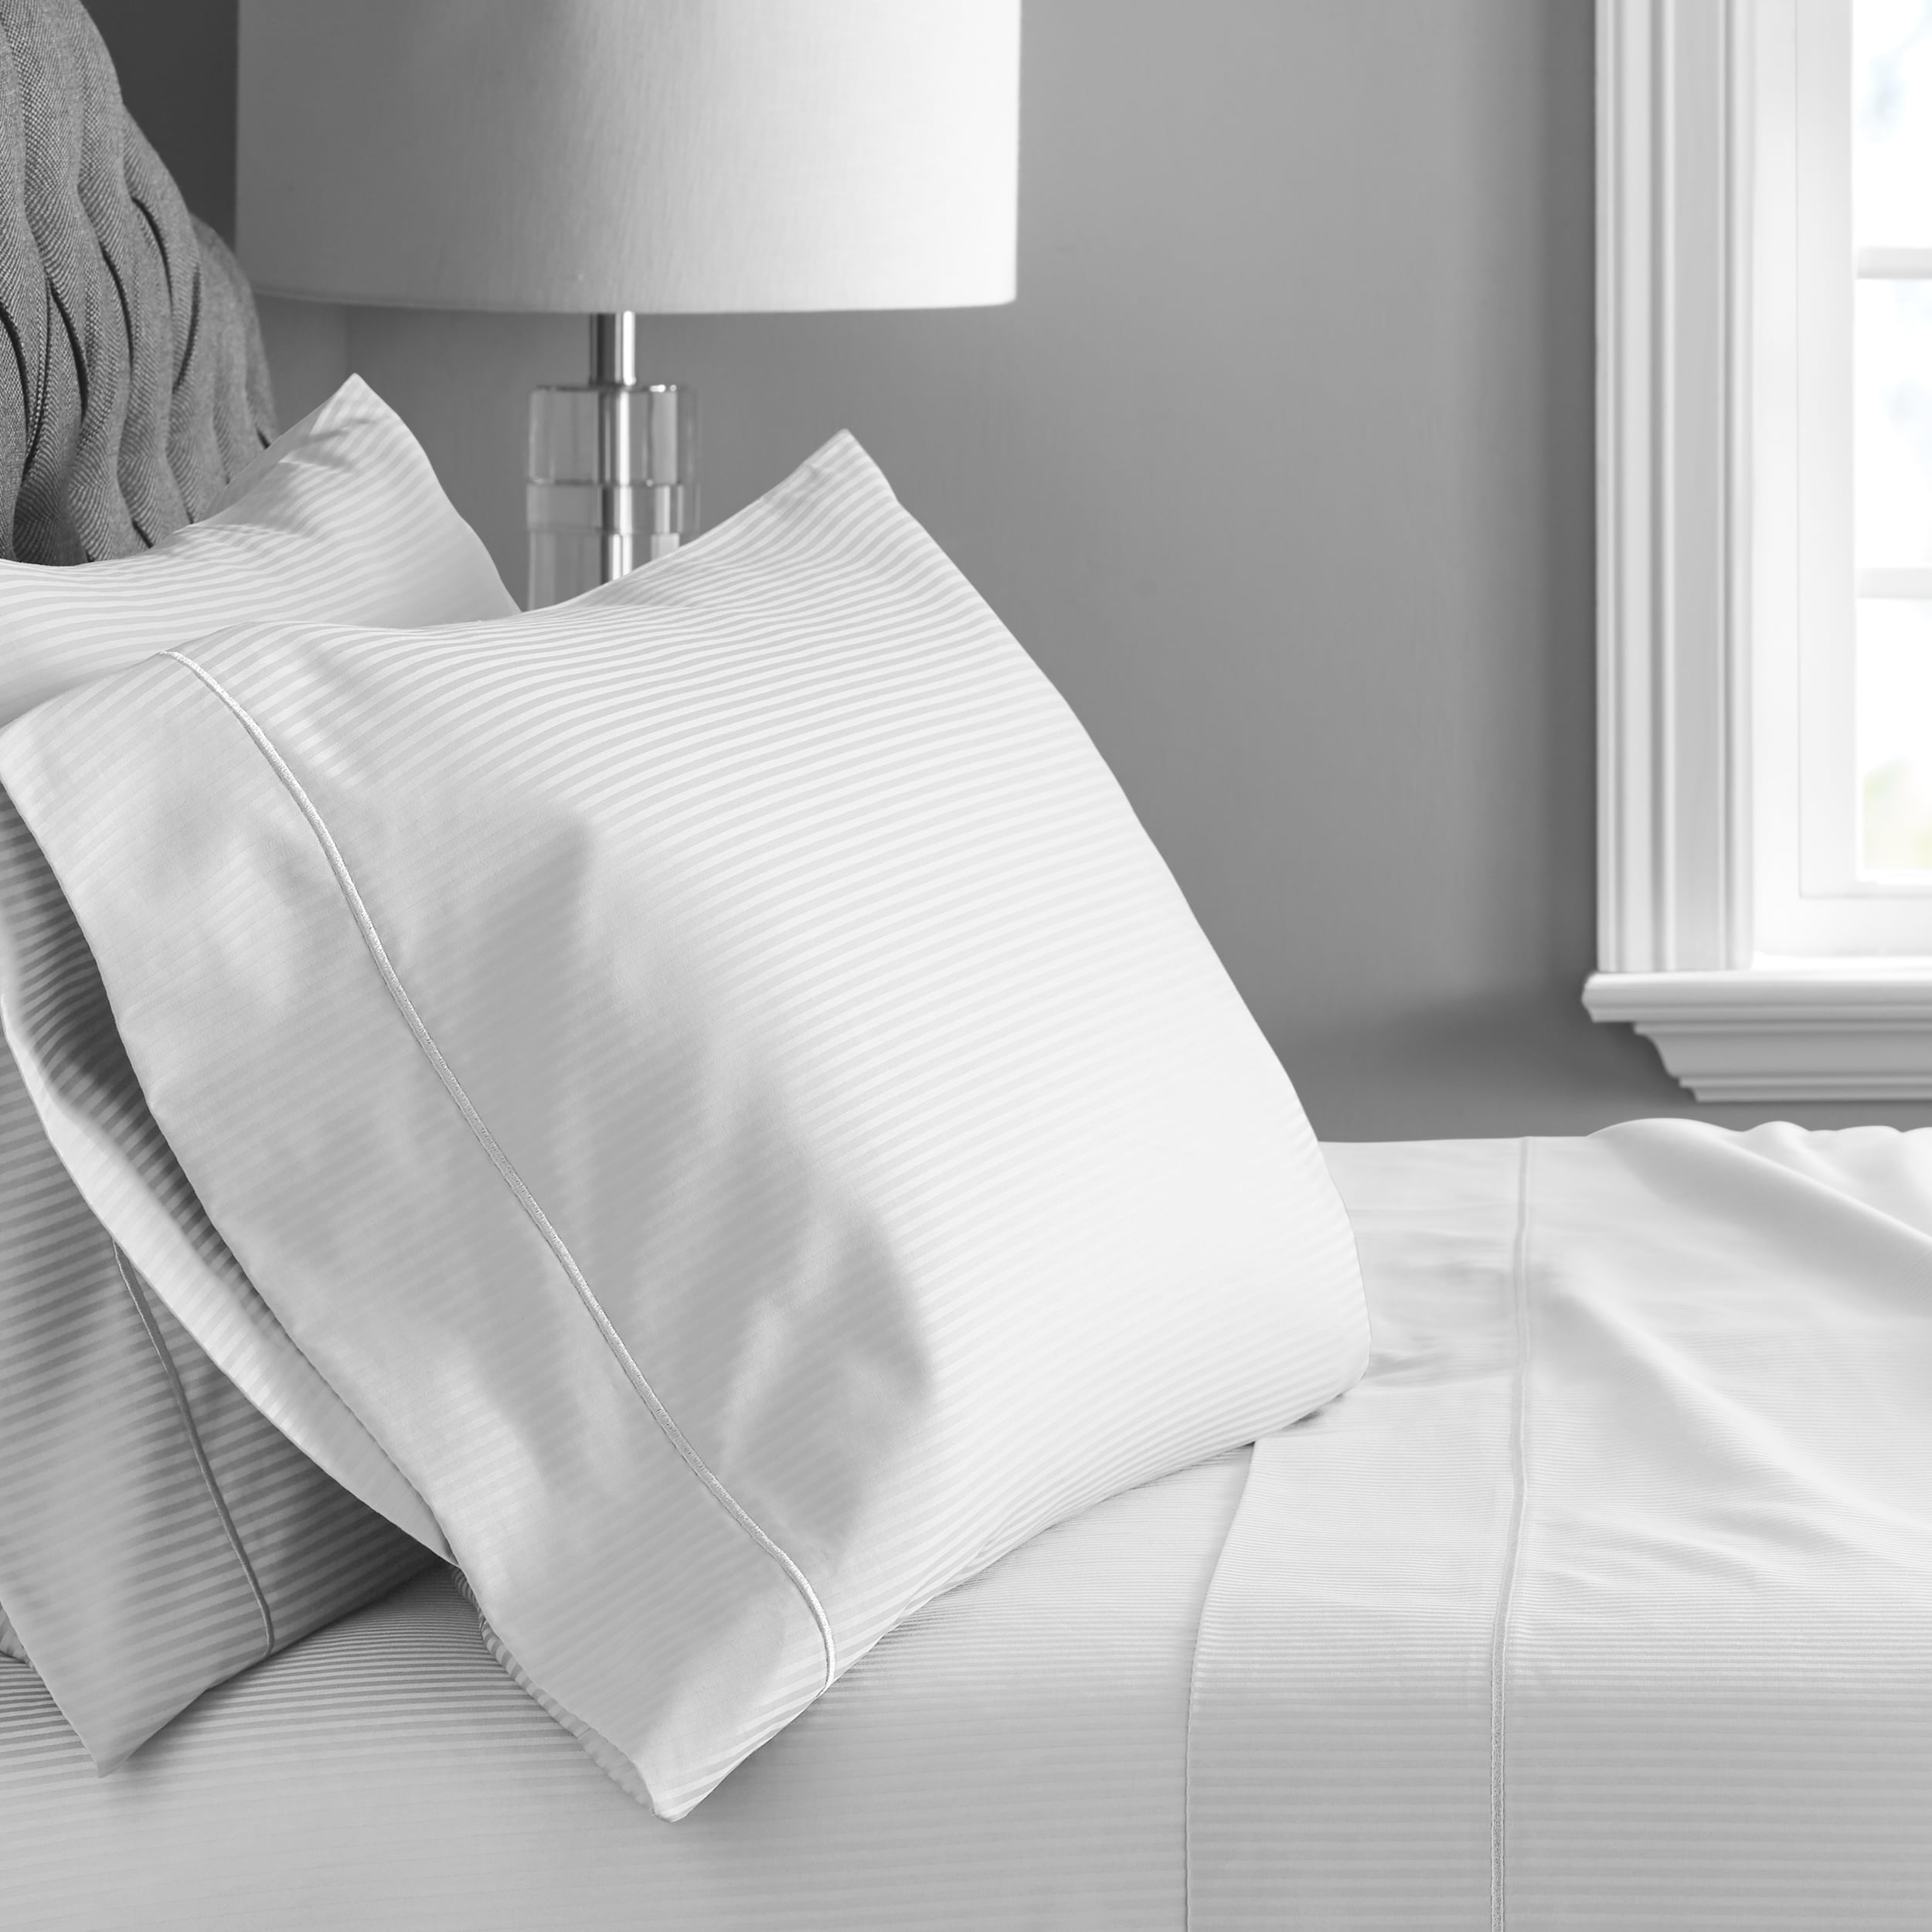 Hotel Style 600 TC set of KING pillow cases 100% Cotton Sateen Weave Cream 